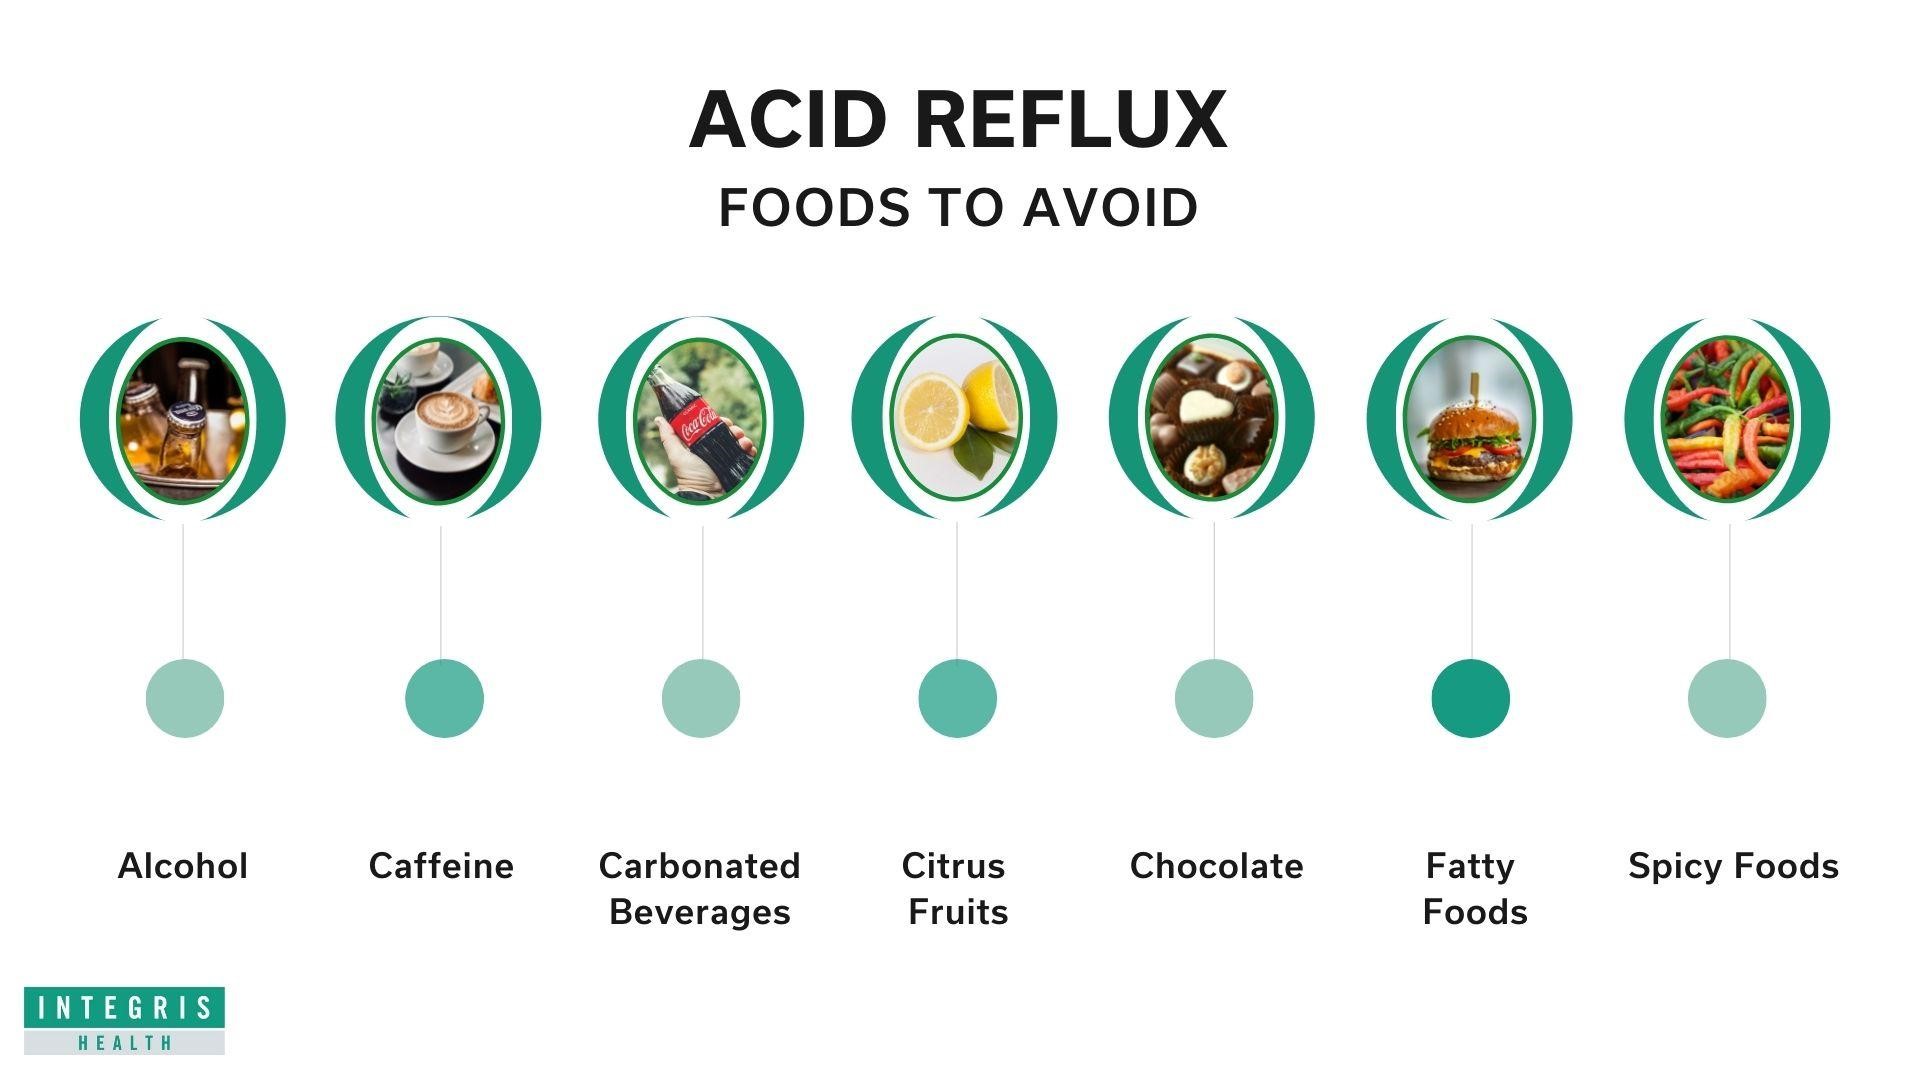 The Foods to Avoid that Causes Acid Reflux